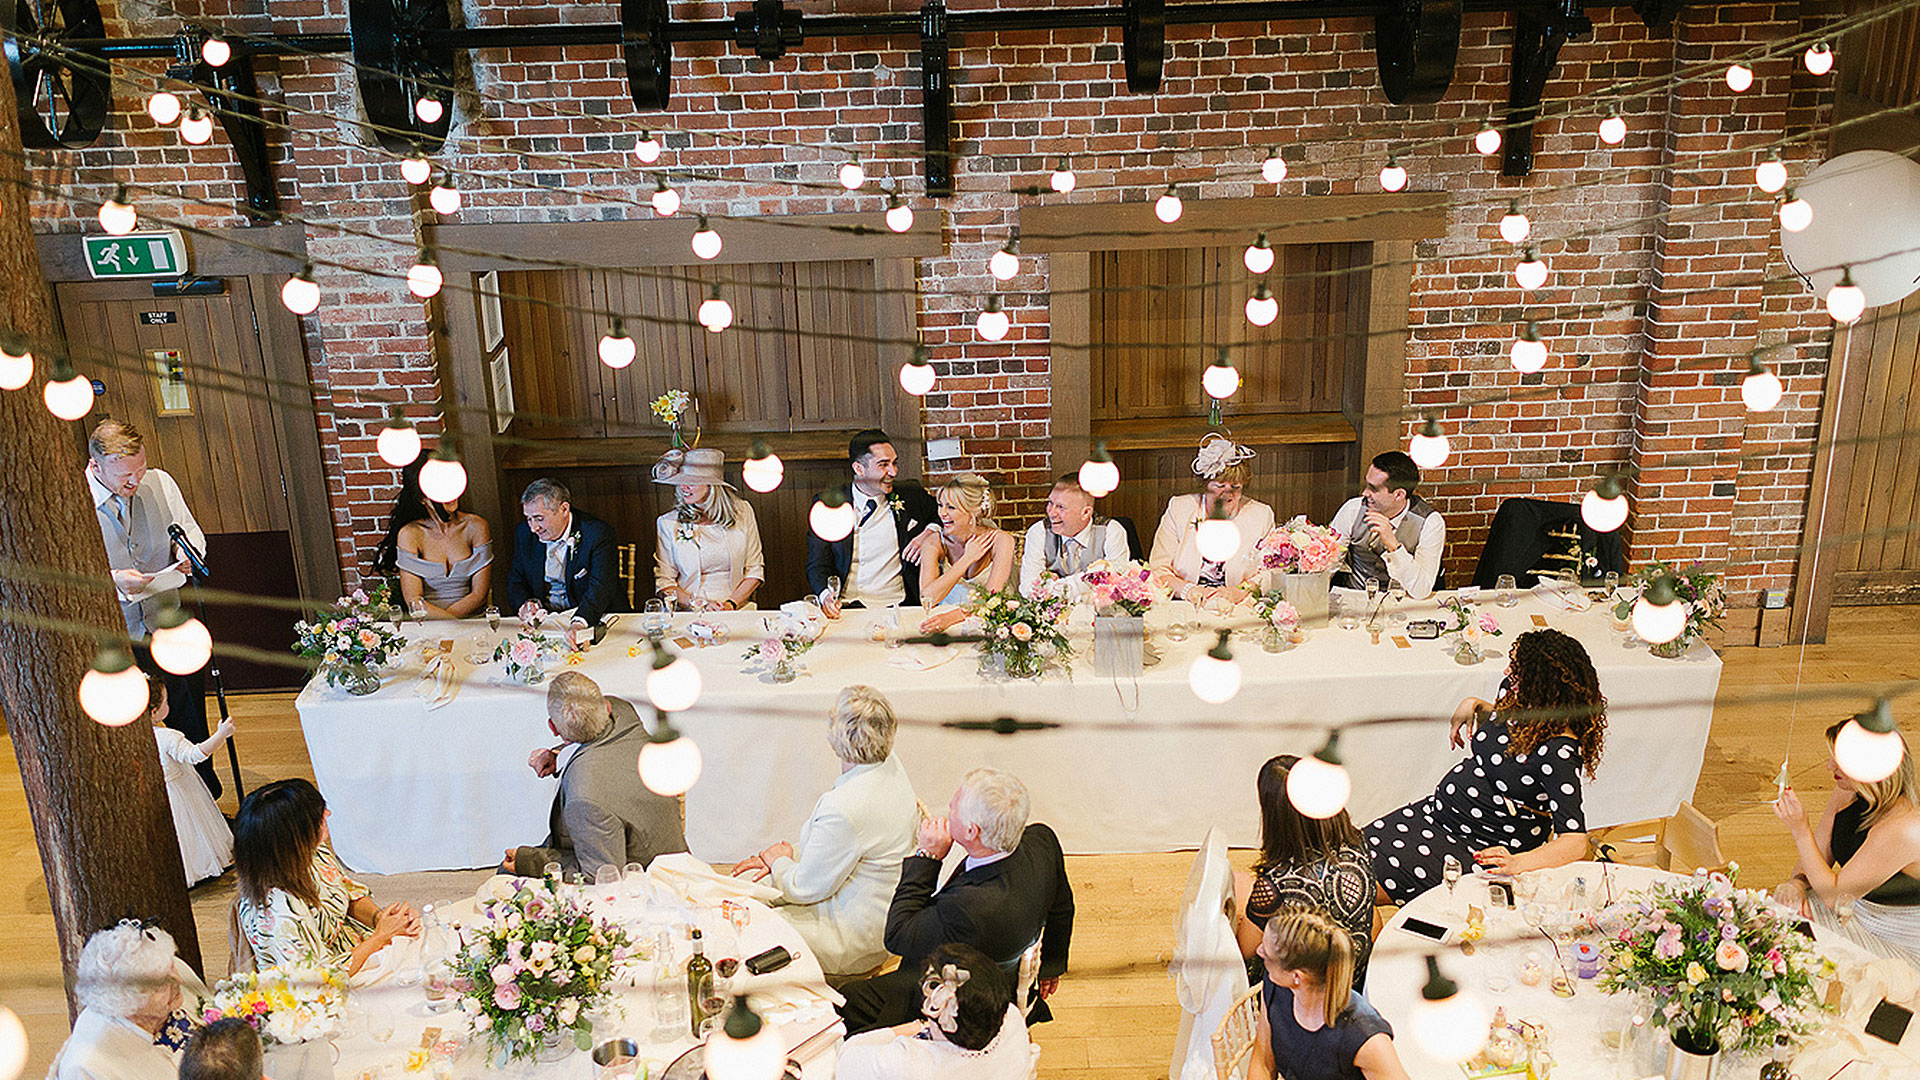 A wedding party enjoy the wedding speeches inside the stunning Mill Barn with exposed oak beams